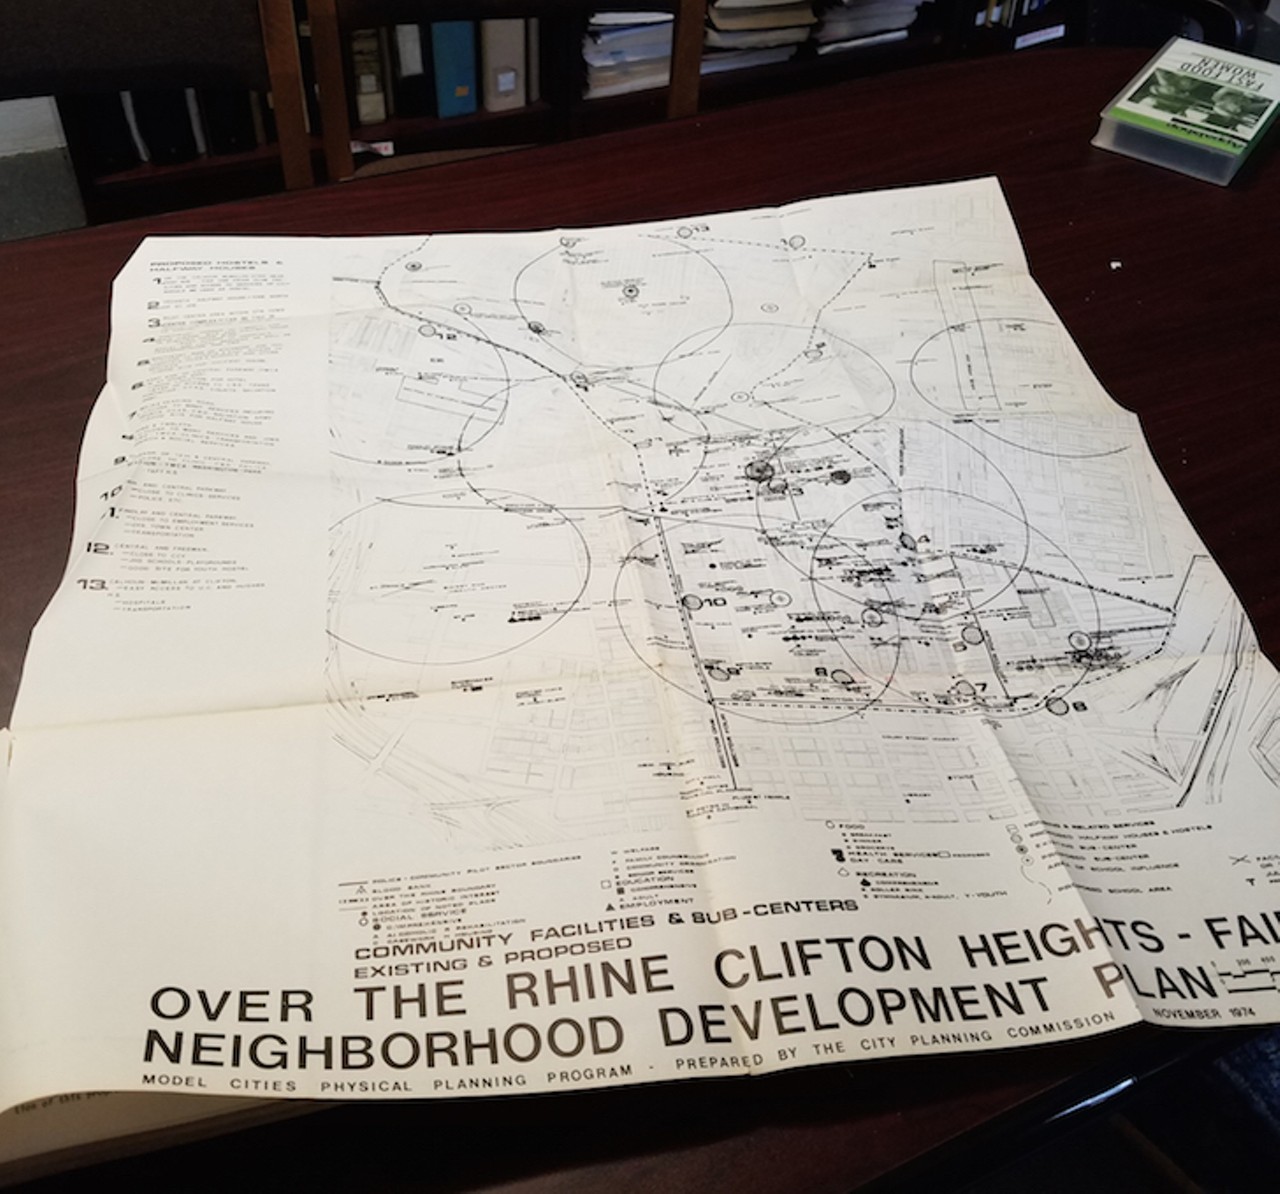 Lower Price Hill has long been home to Cincinnatians who trace their roots back to Appalachia. Community Matters has a library of material related to Urban Appalachians in Cincinnati.